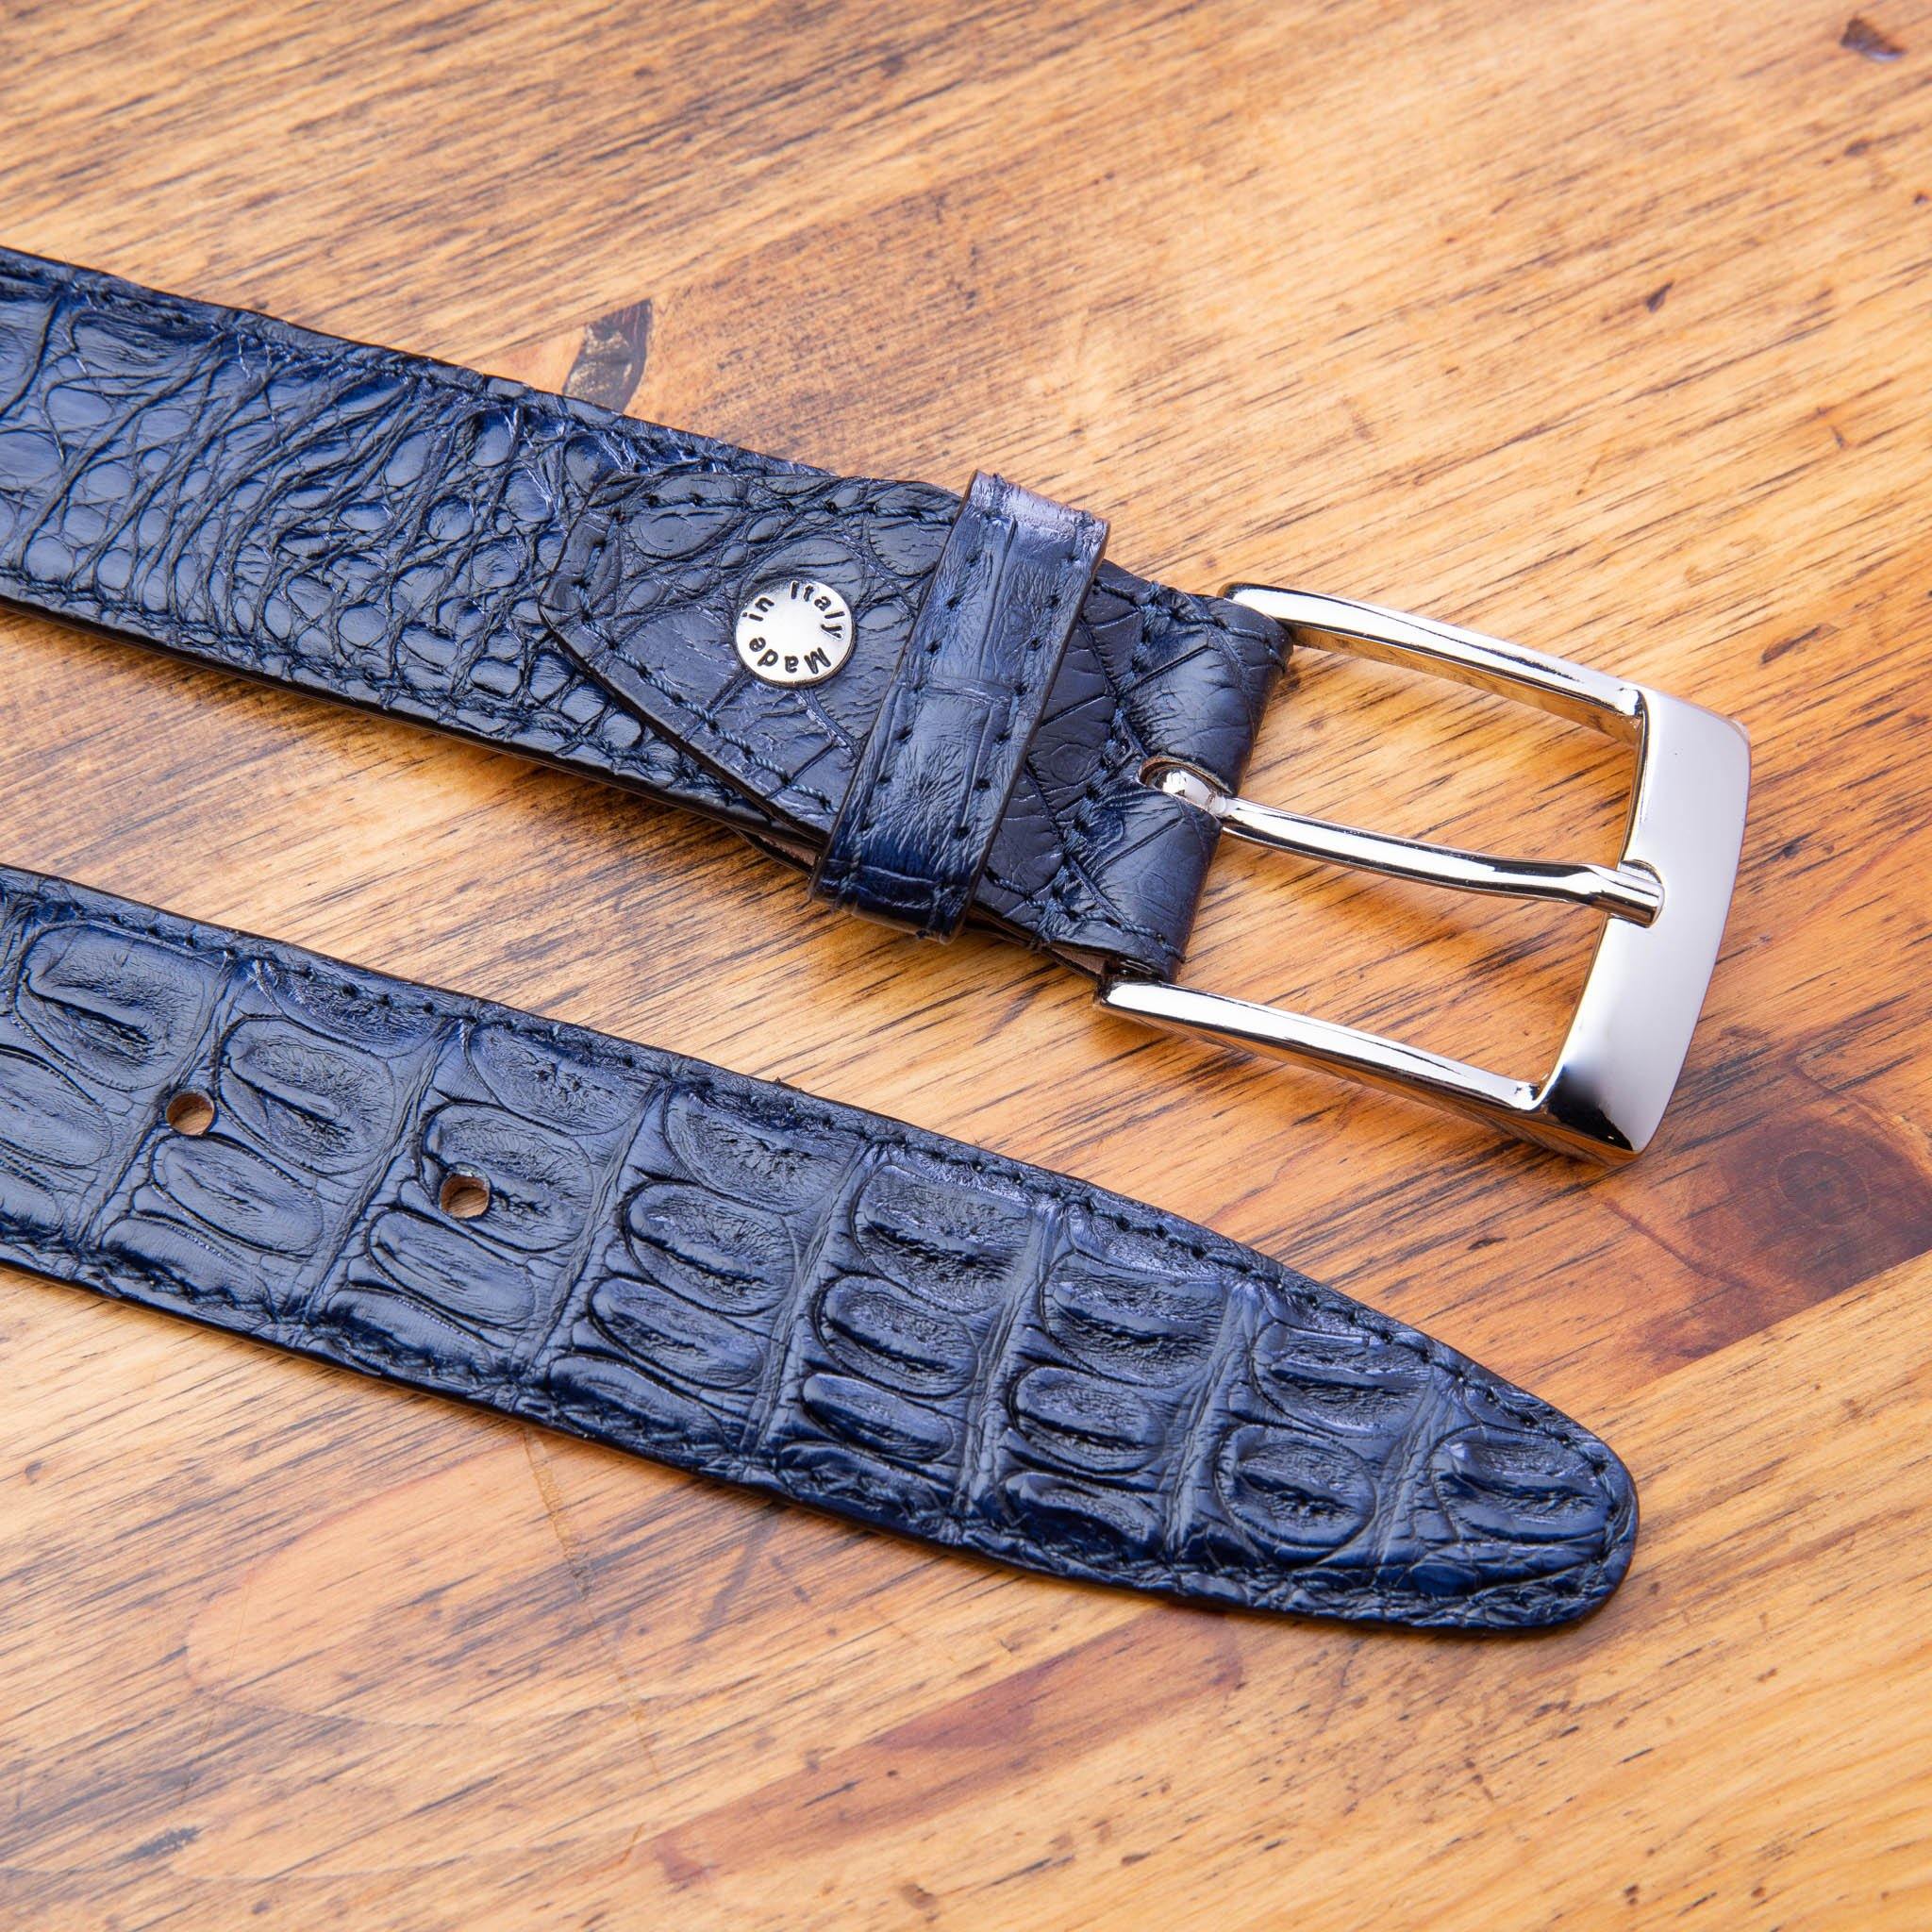 Up close picture of the silver buckle of C7981 Calzoleria Toscana Navy Exotic Hornback Belt on top of a wooden table